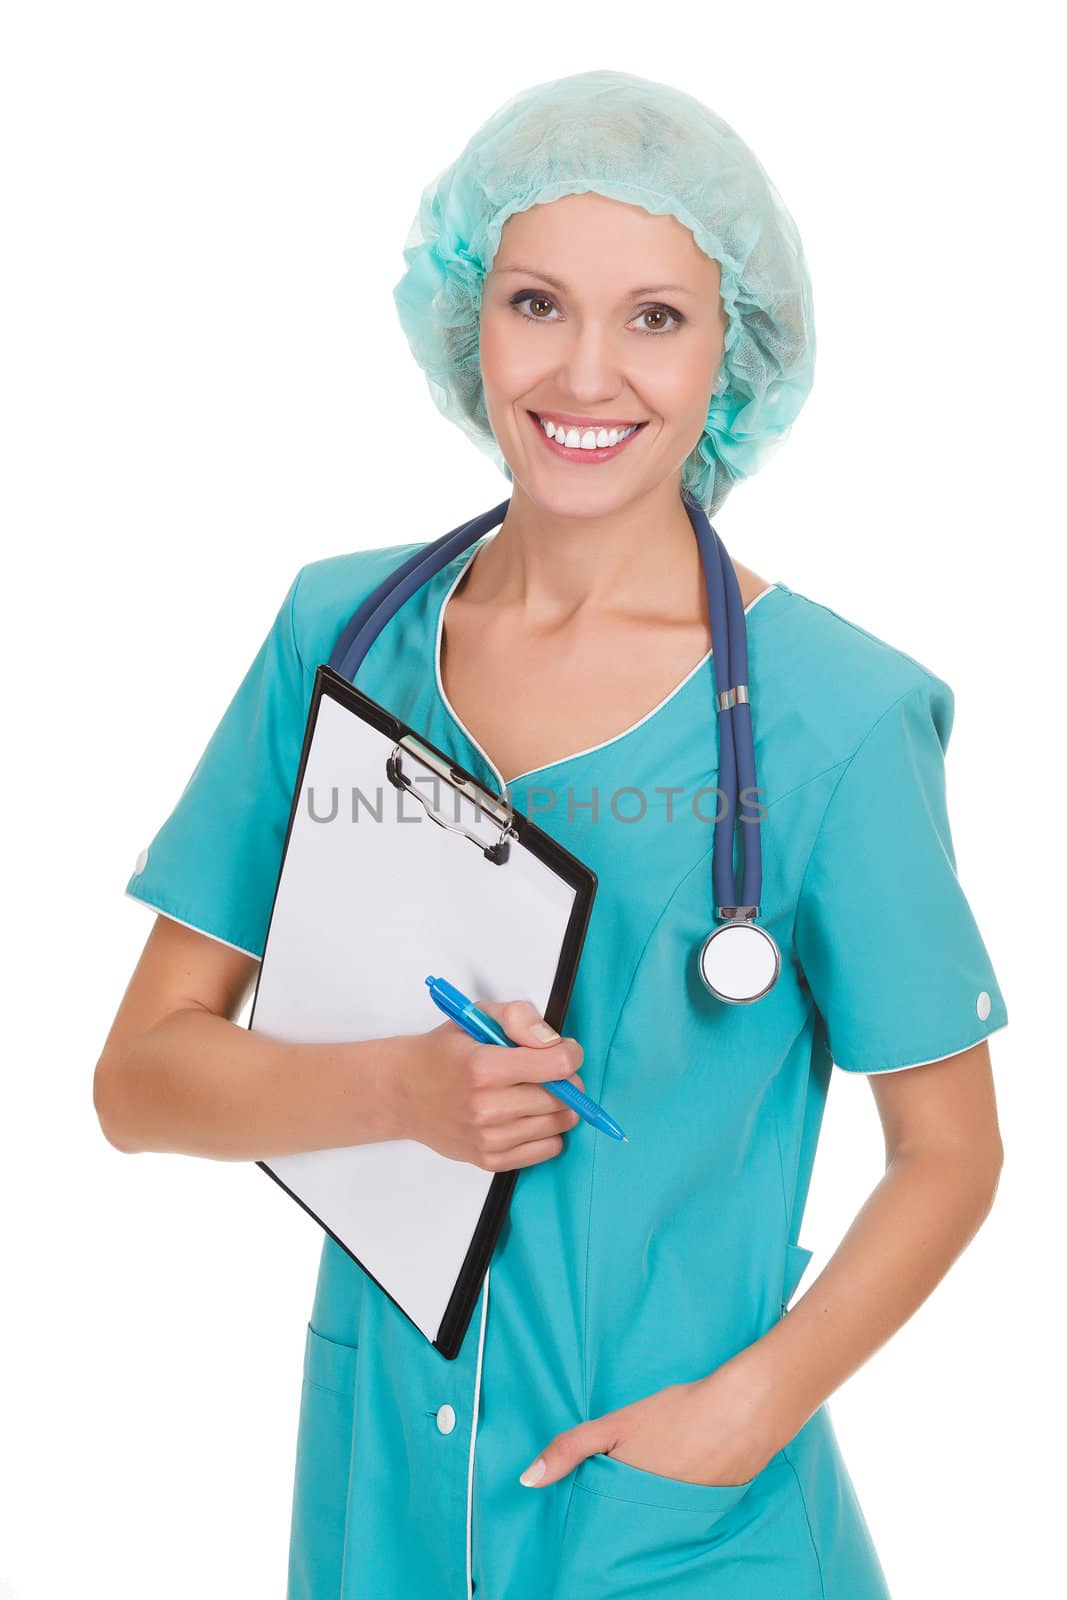 Smiling medical doctor woman with stethoscope and clipboard. Isolated over white background